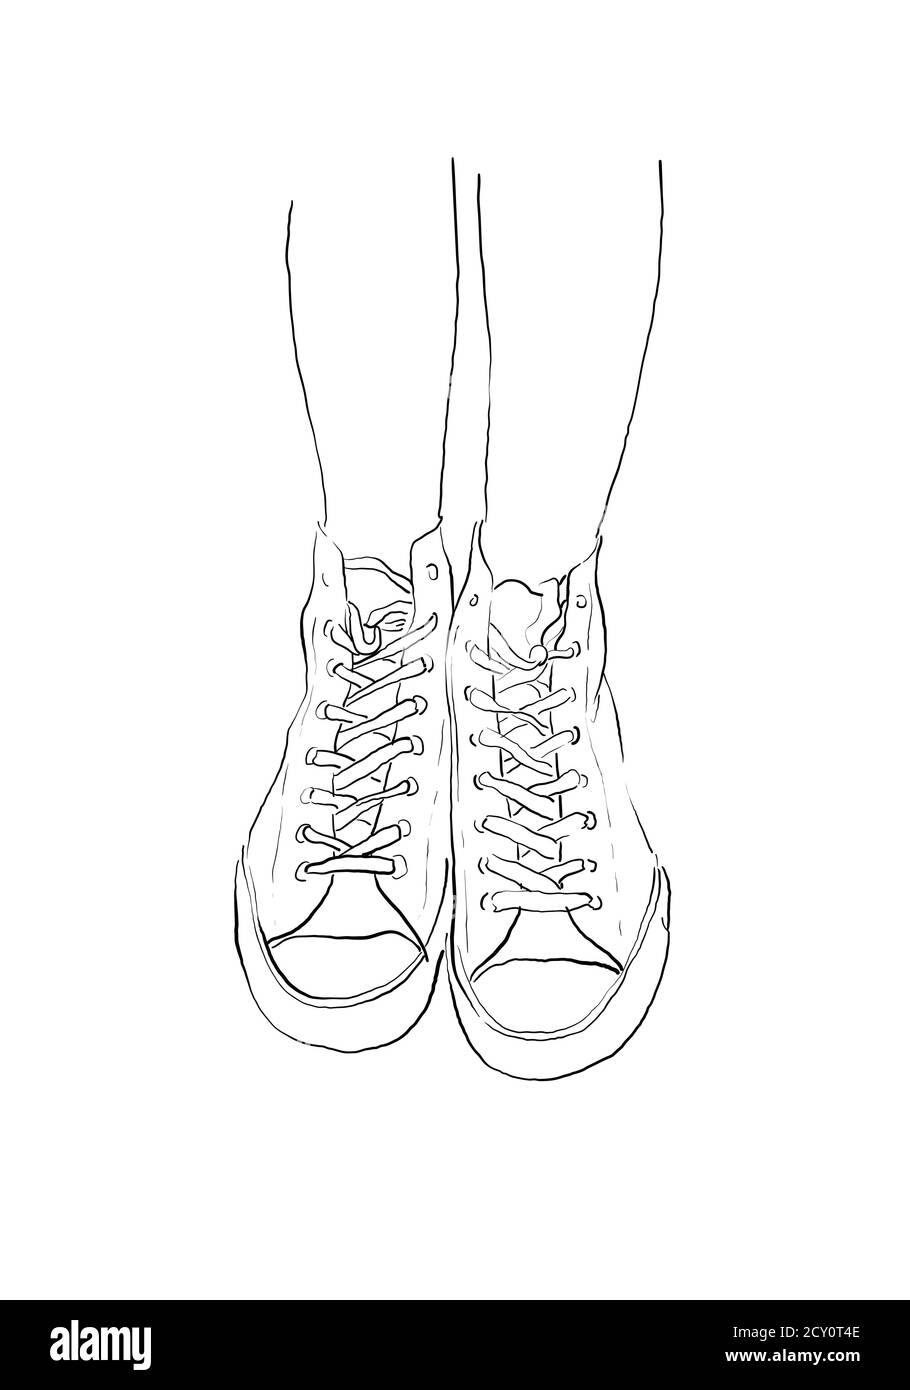 One line illustration of sneakers. Sports shoes in a line drawing style for sport & branding design. Stock Photo